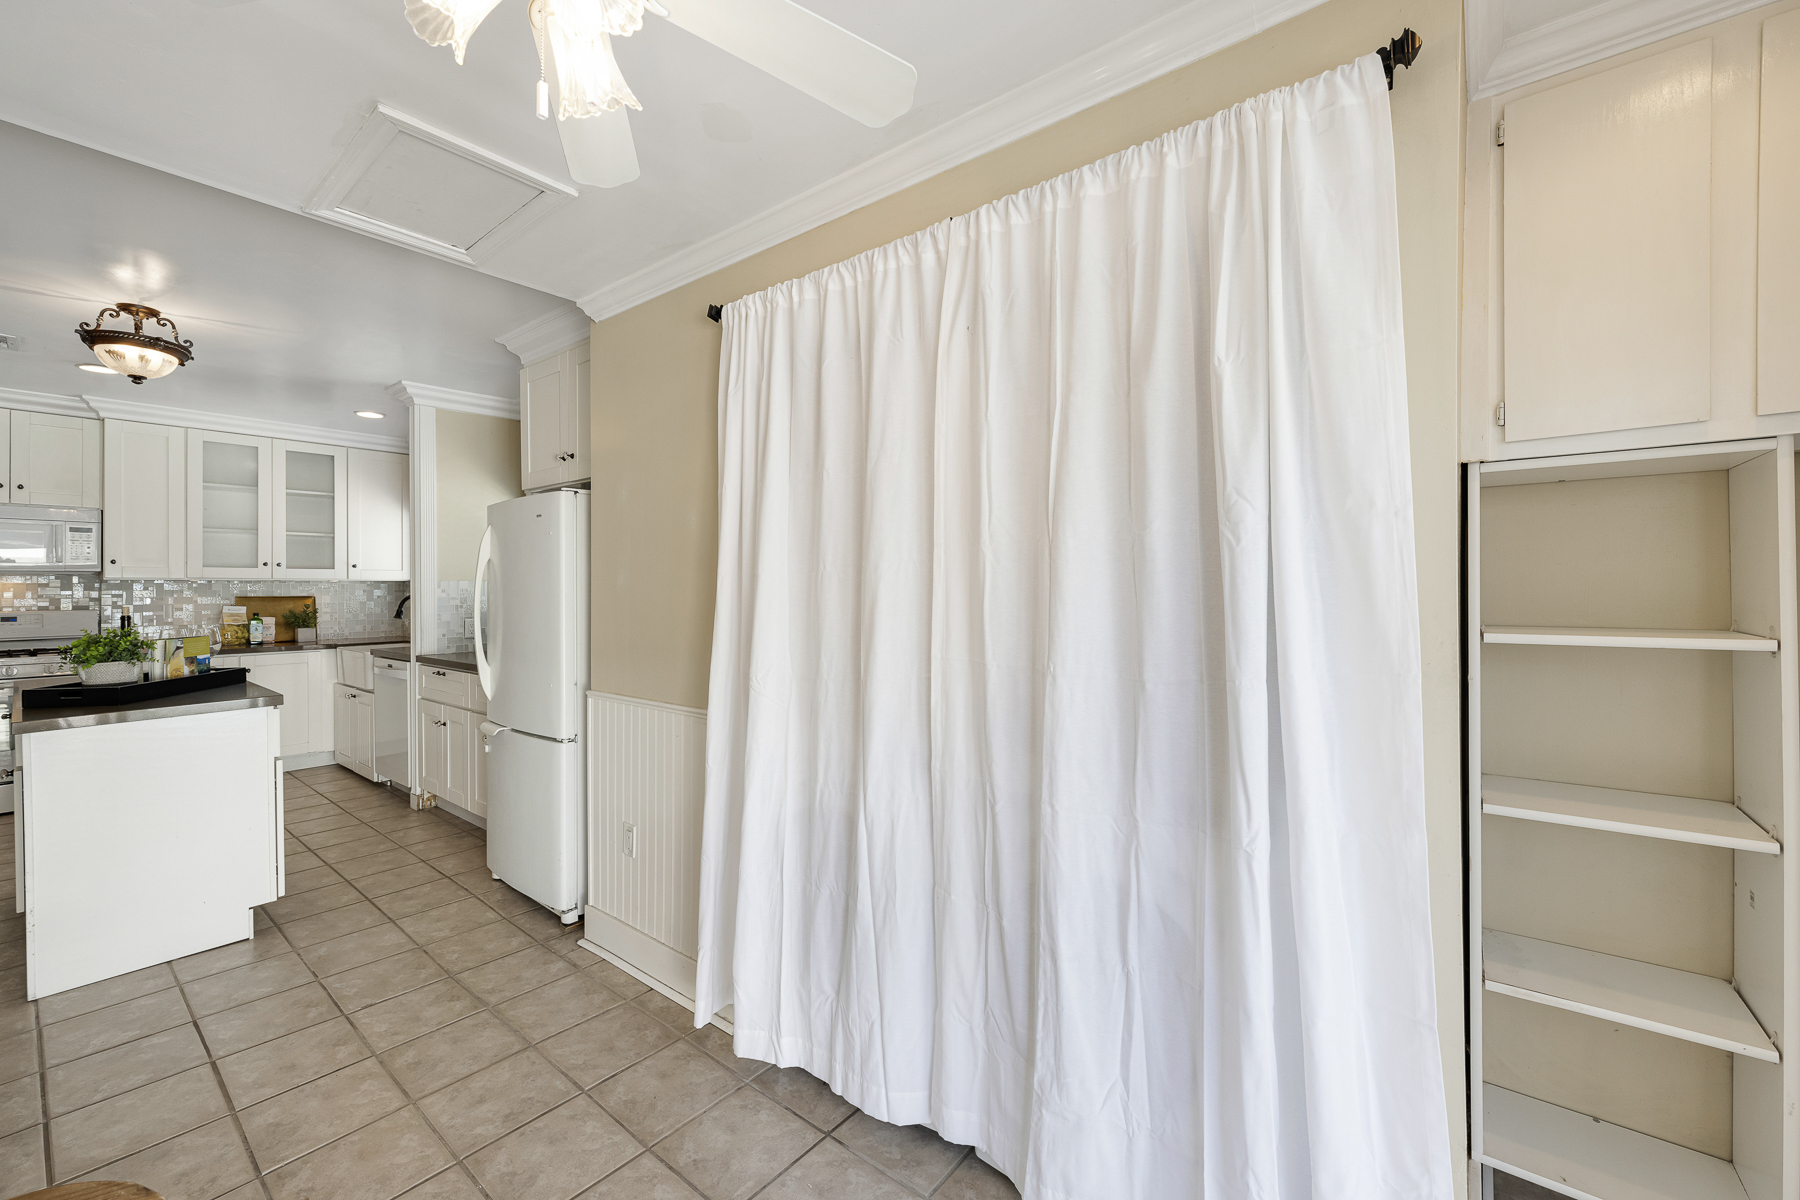 1229 Grove Place Fullerton CA 92831: Hallway looking into kitchen with curtain